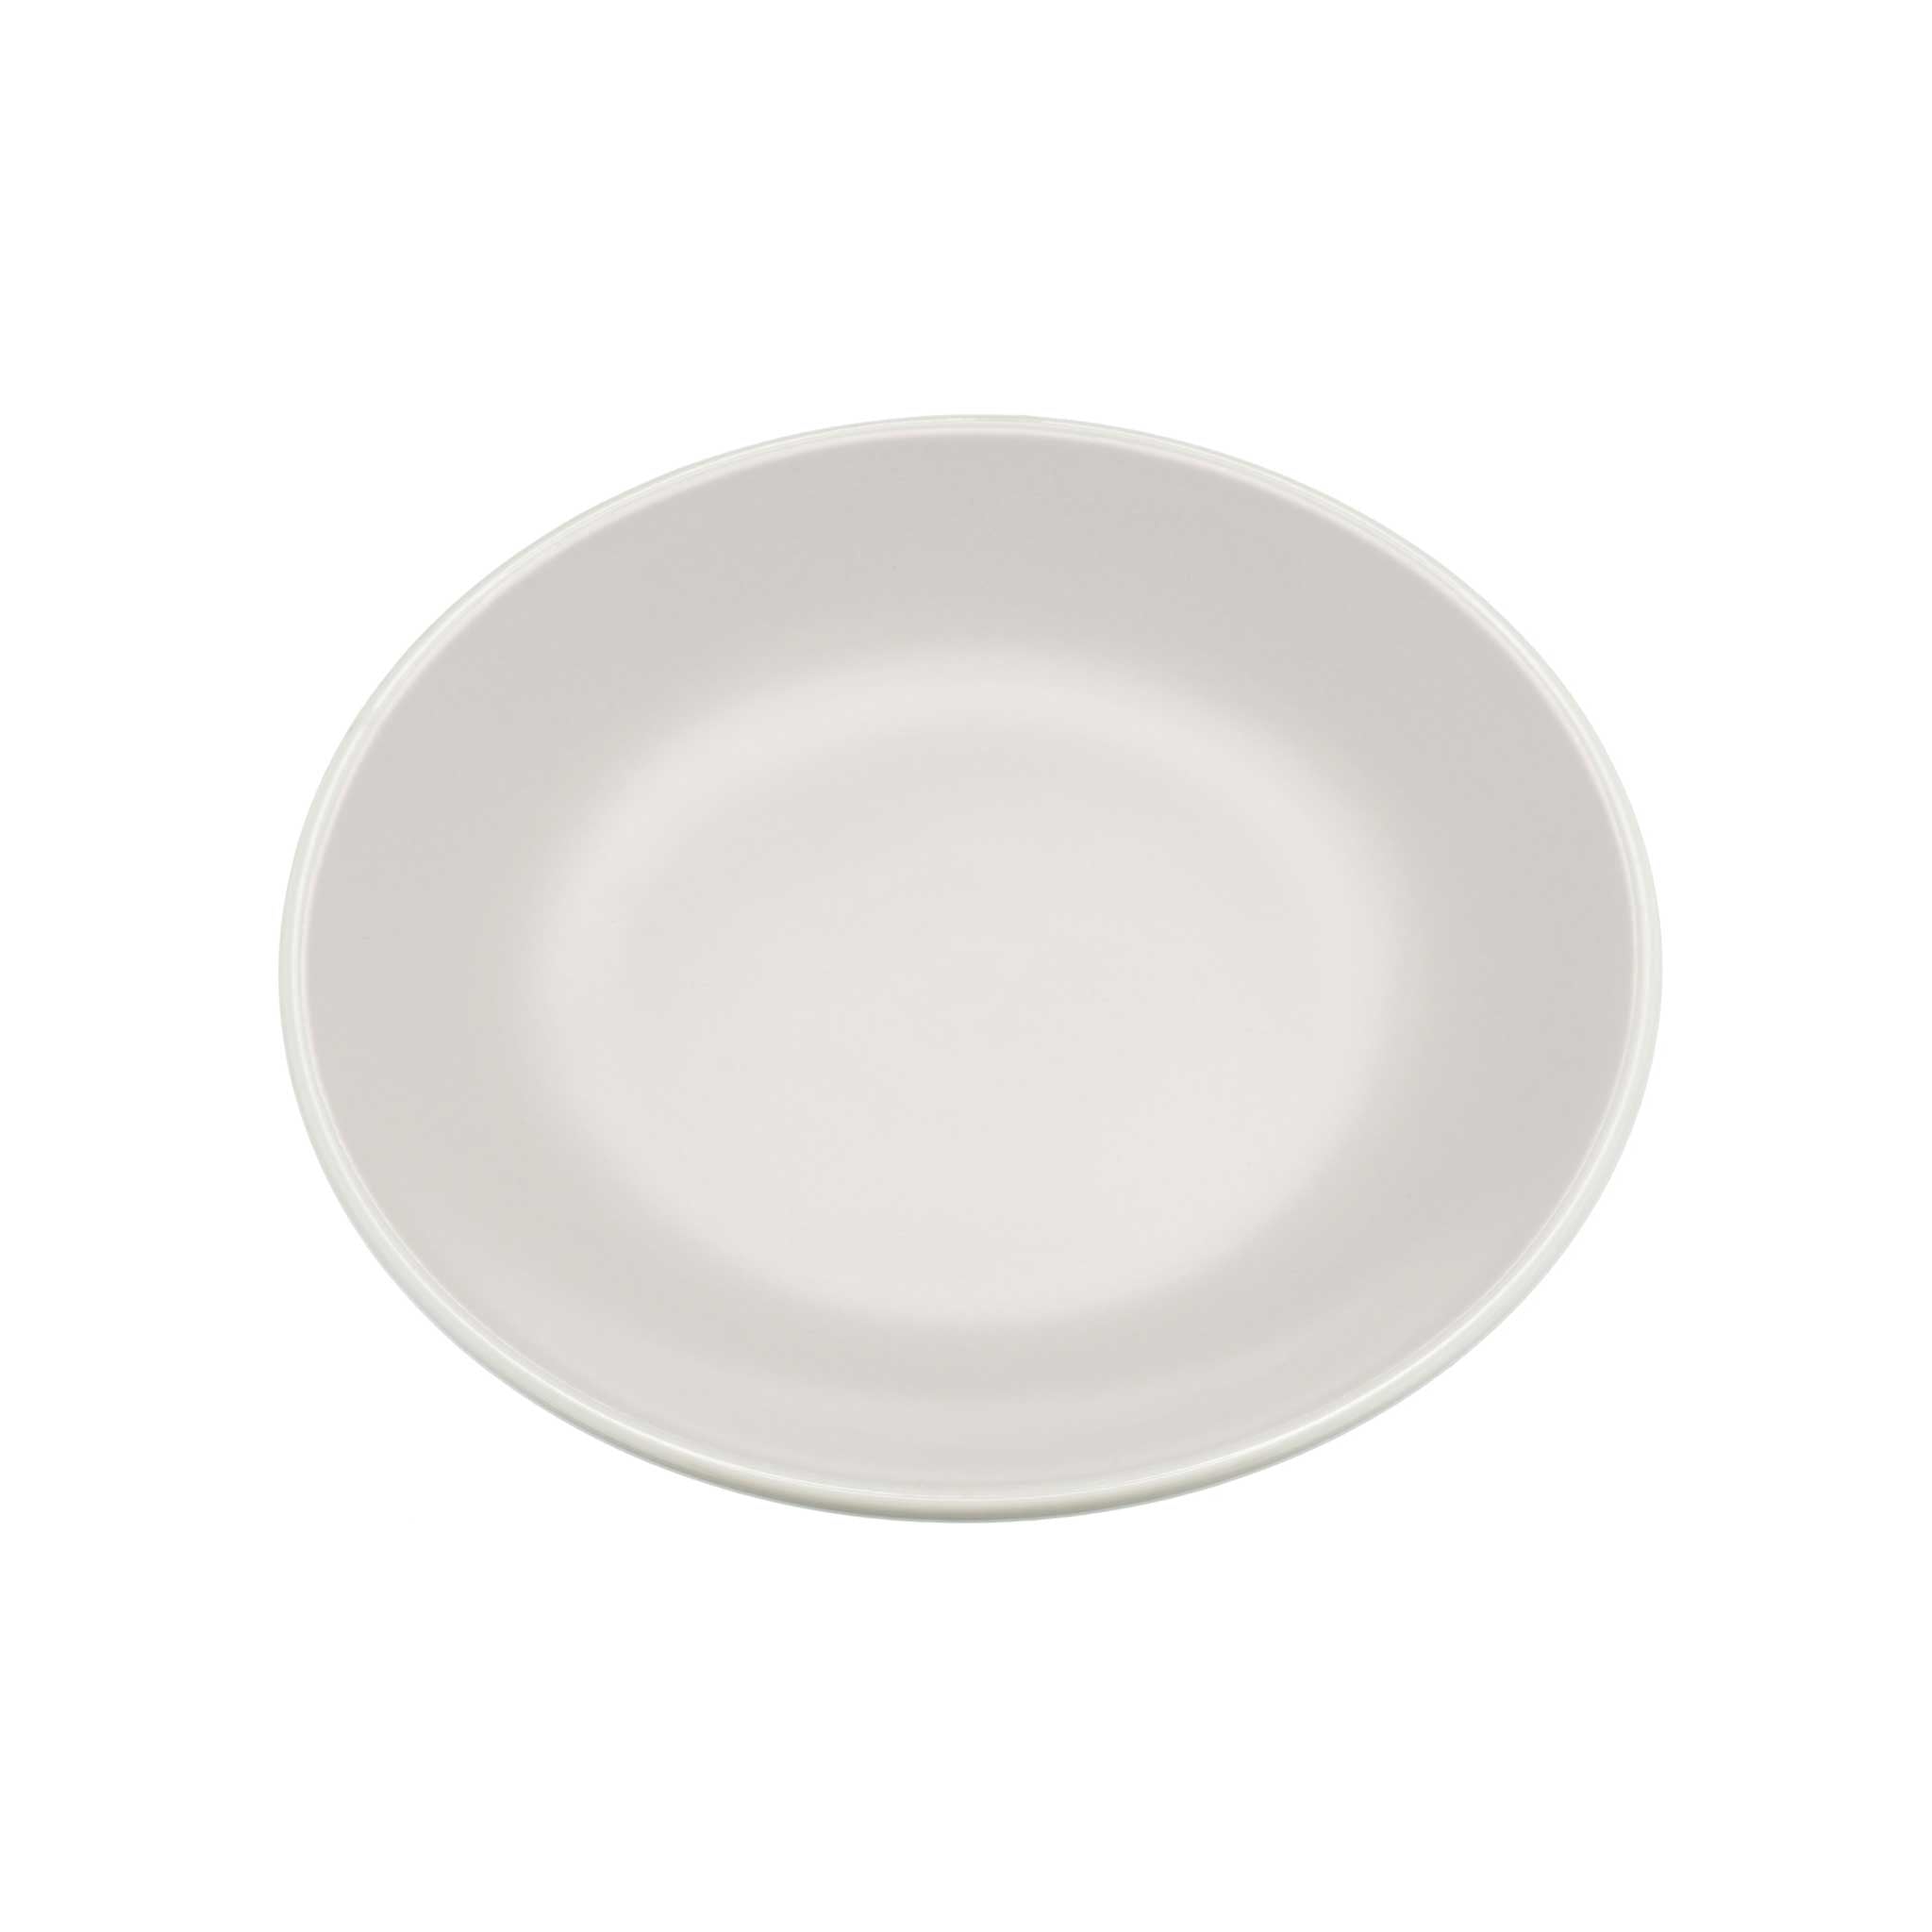 Stone Bread Plate from China Blue